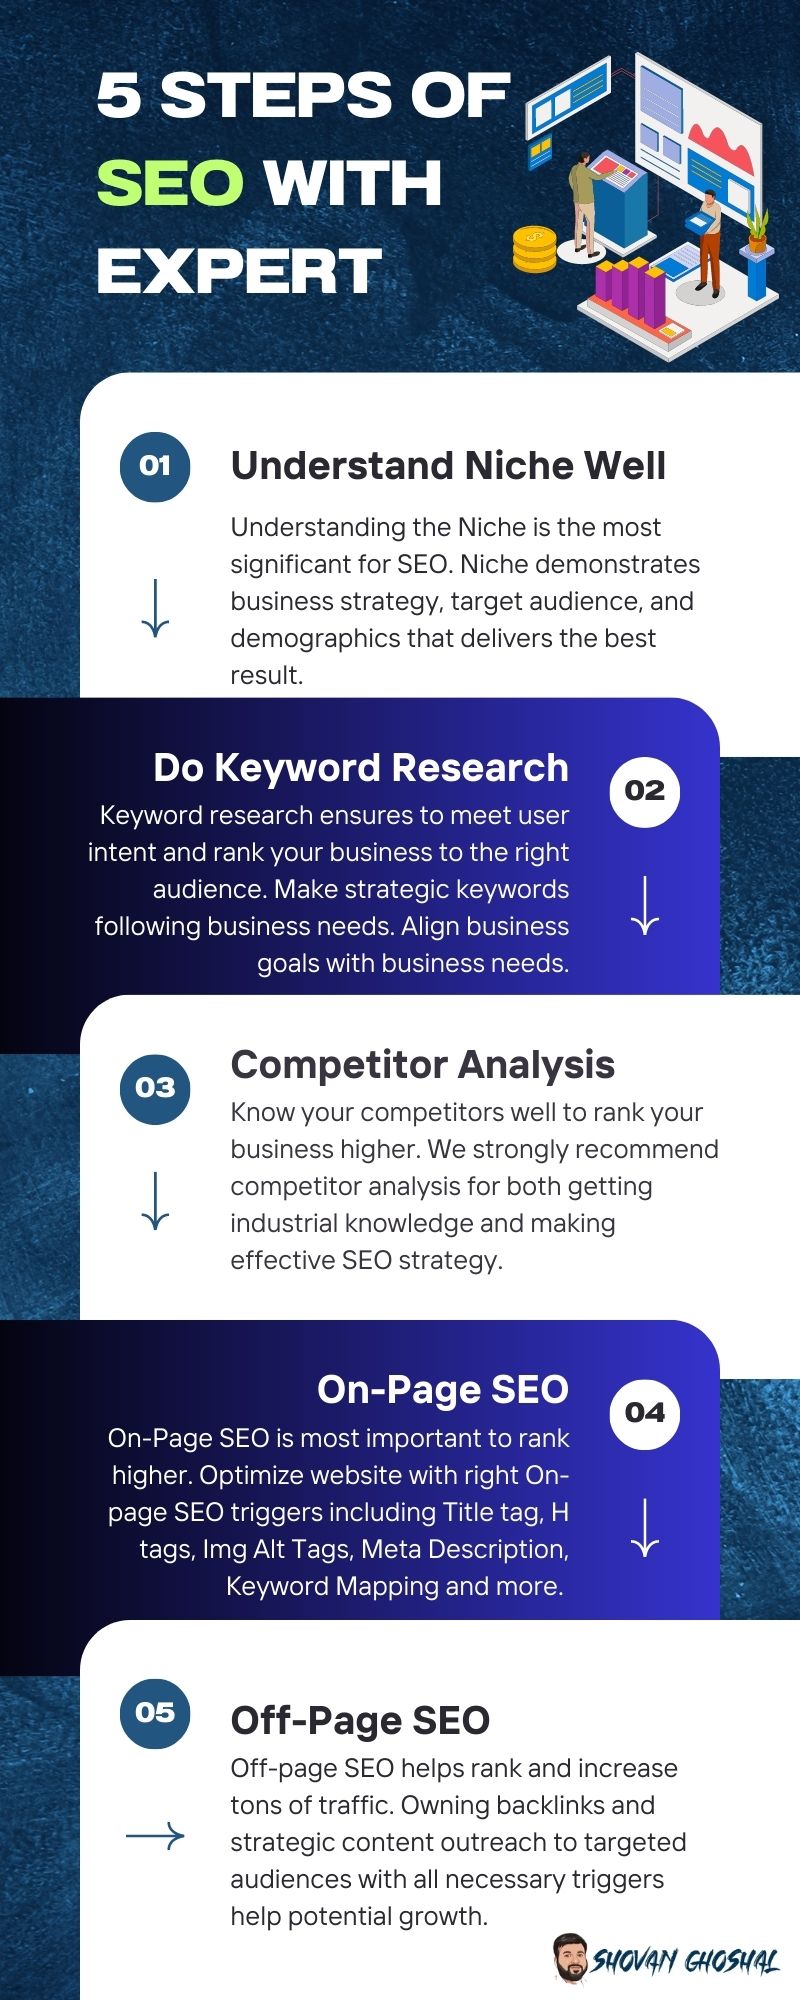 5 Steps of SEO with Expert  - shovan ghoshal